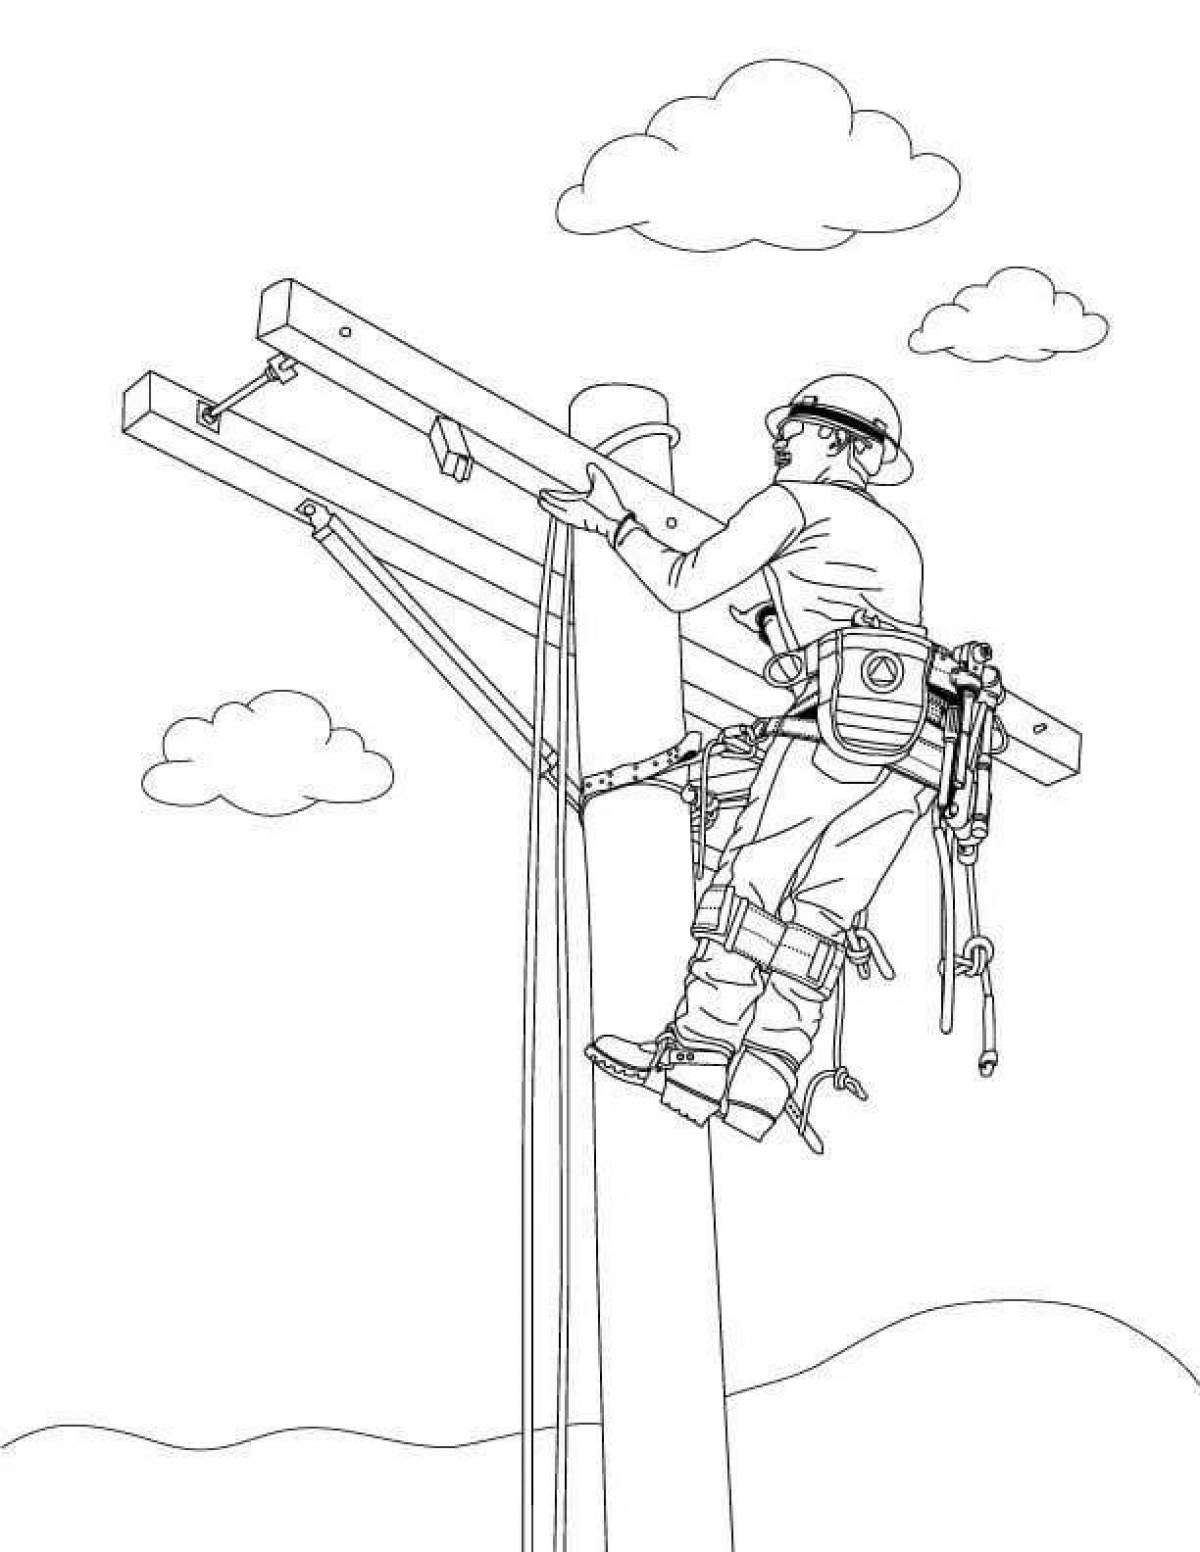 Electrician coloring page